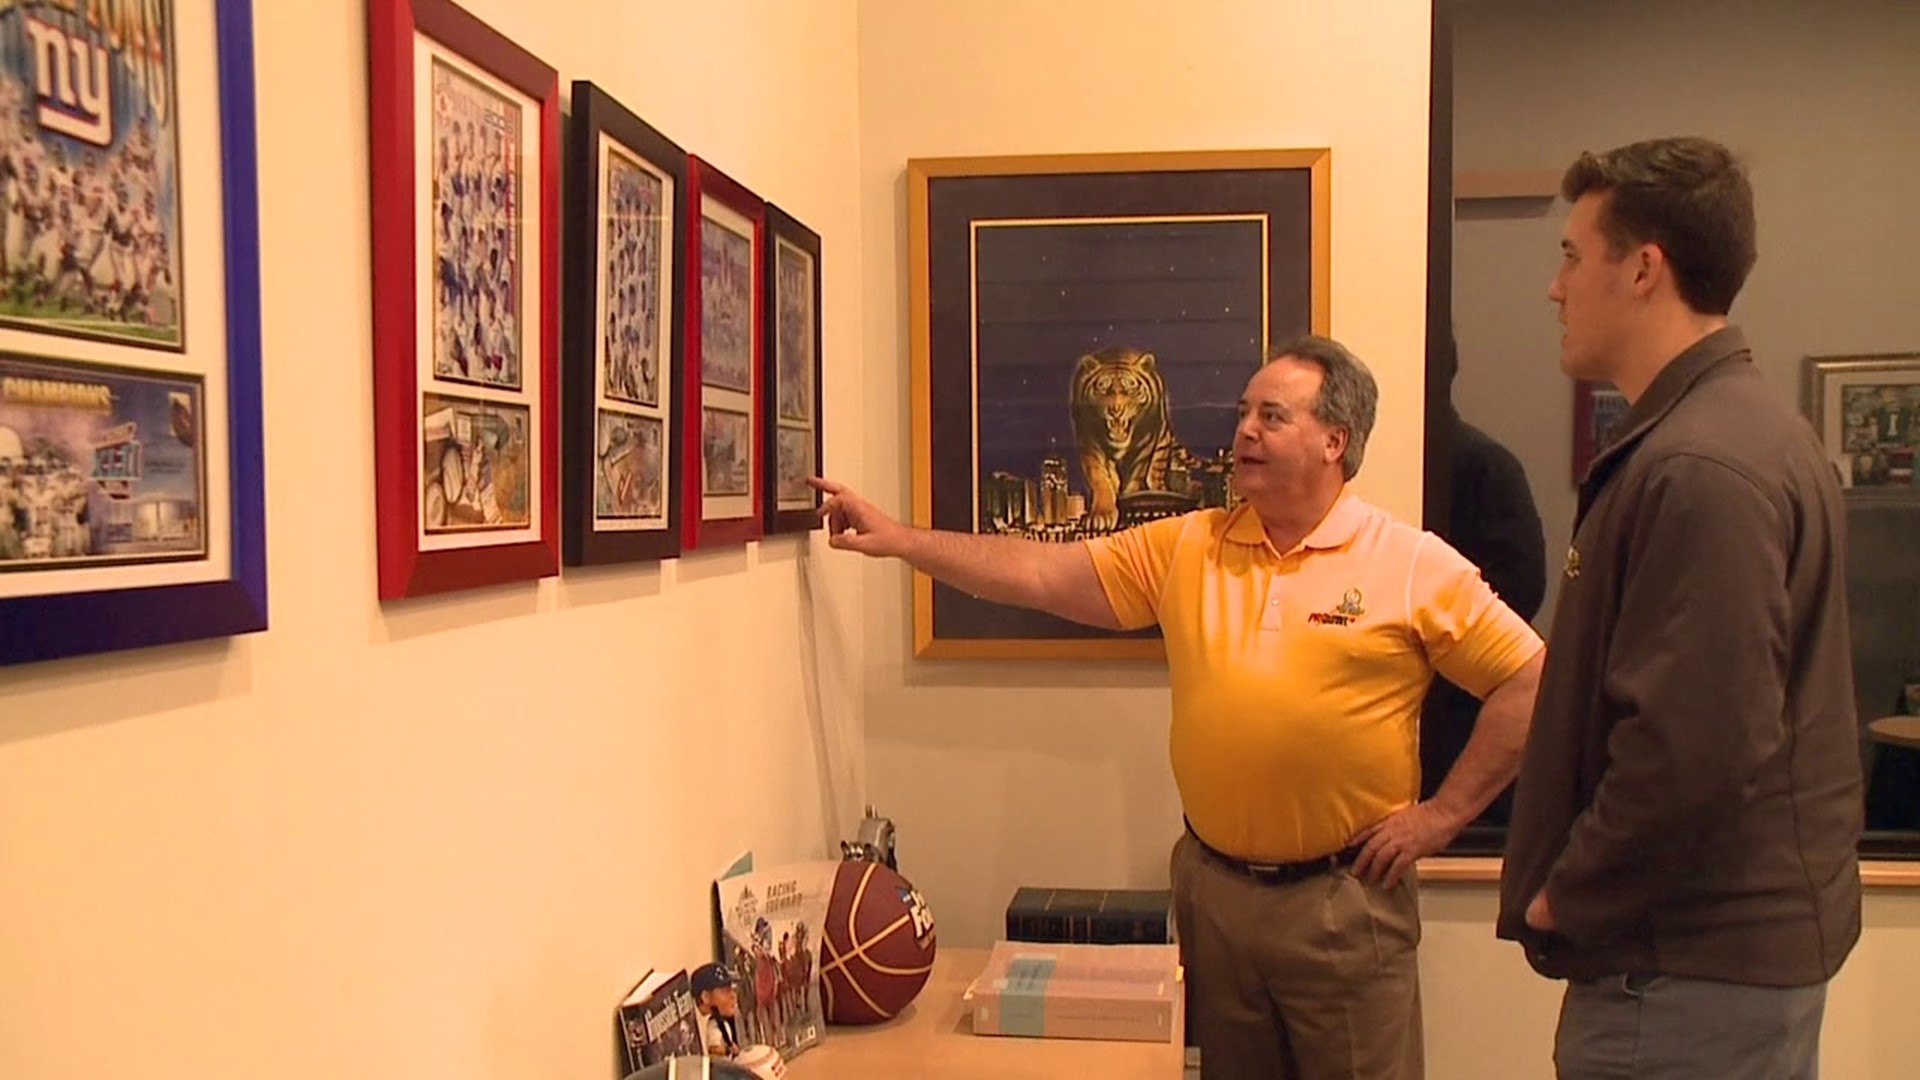 Each piece of Larry Spegar's Super Bowl collection is tied to a memory that he got to experience in person for more than two decades.